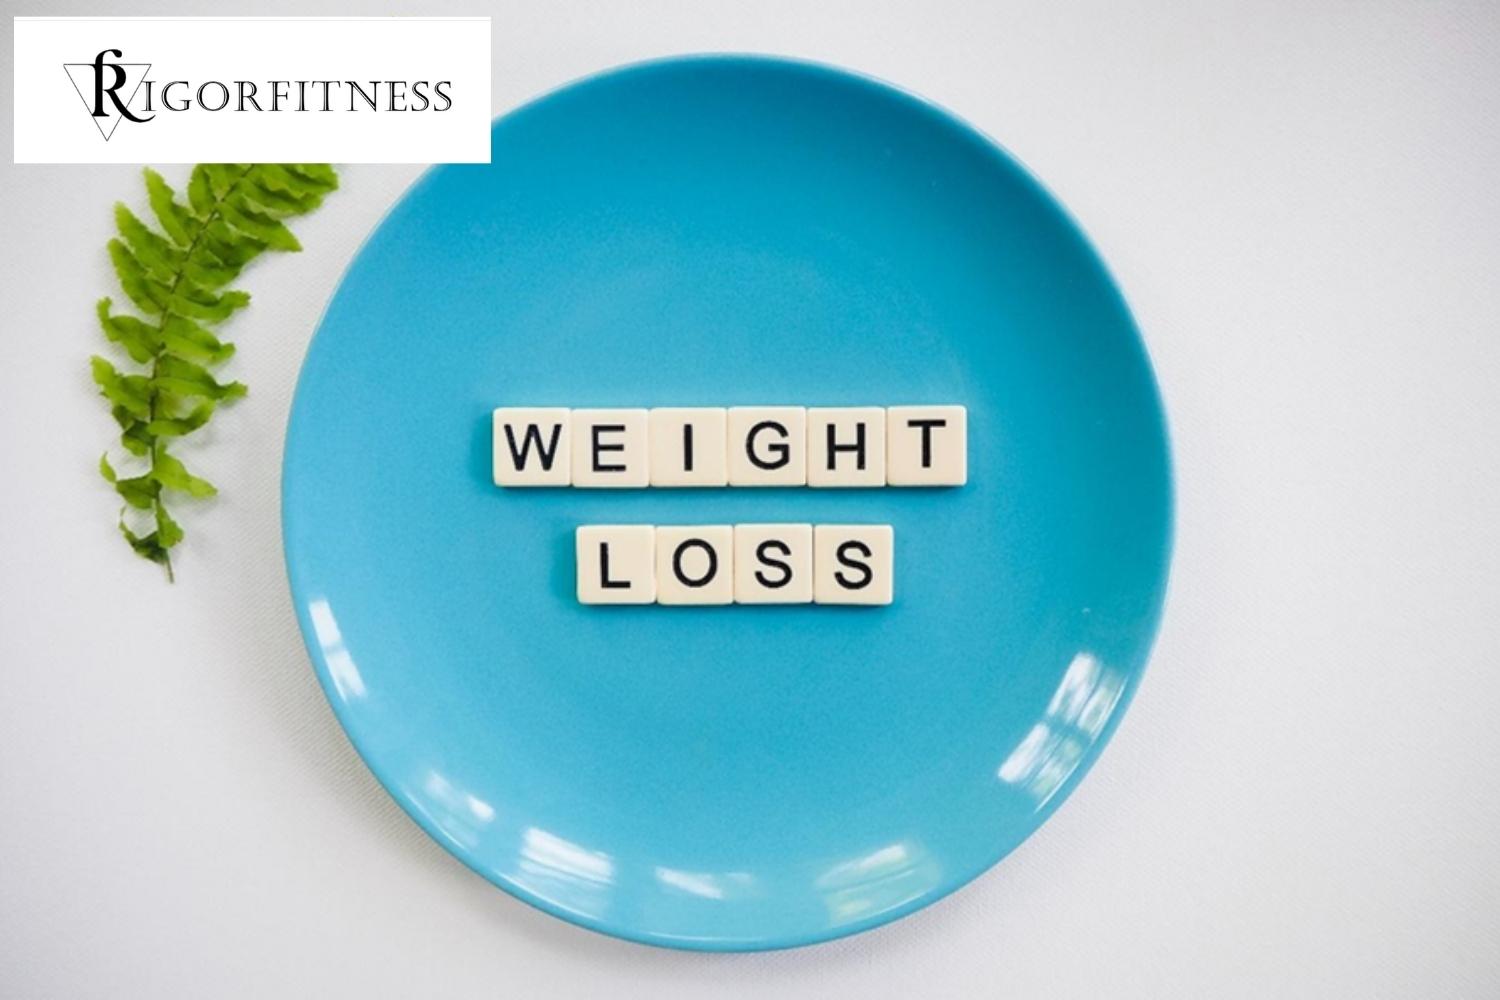 10-tips-for-losing-weight-rigor-fitness-fat-loss-muscle-gain-strength-gain